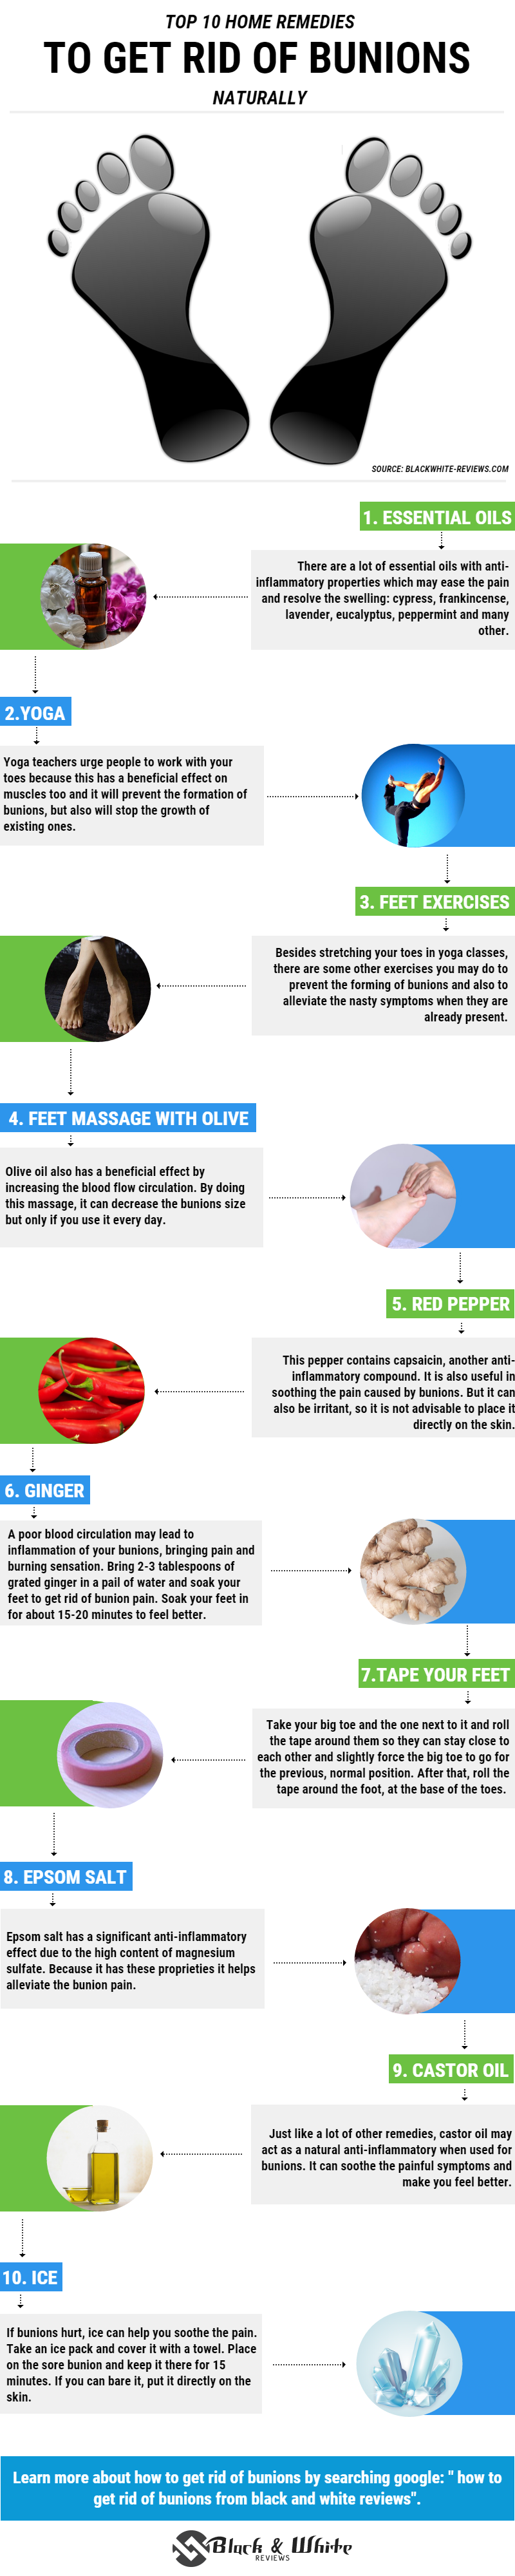 how to get rid of bunions -infographic